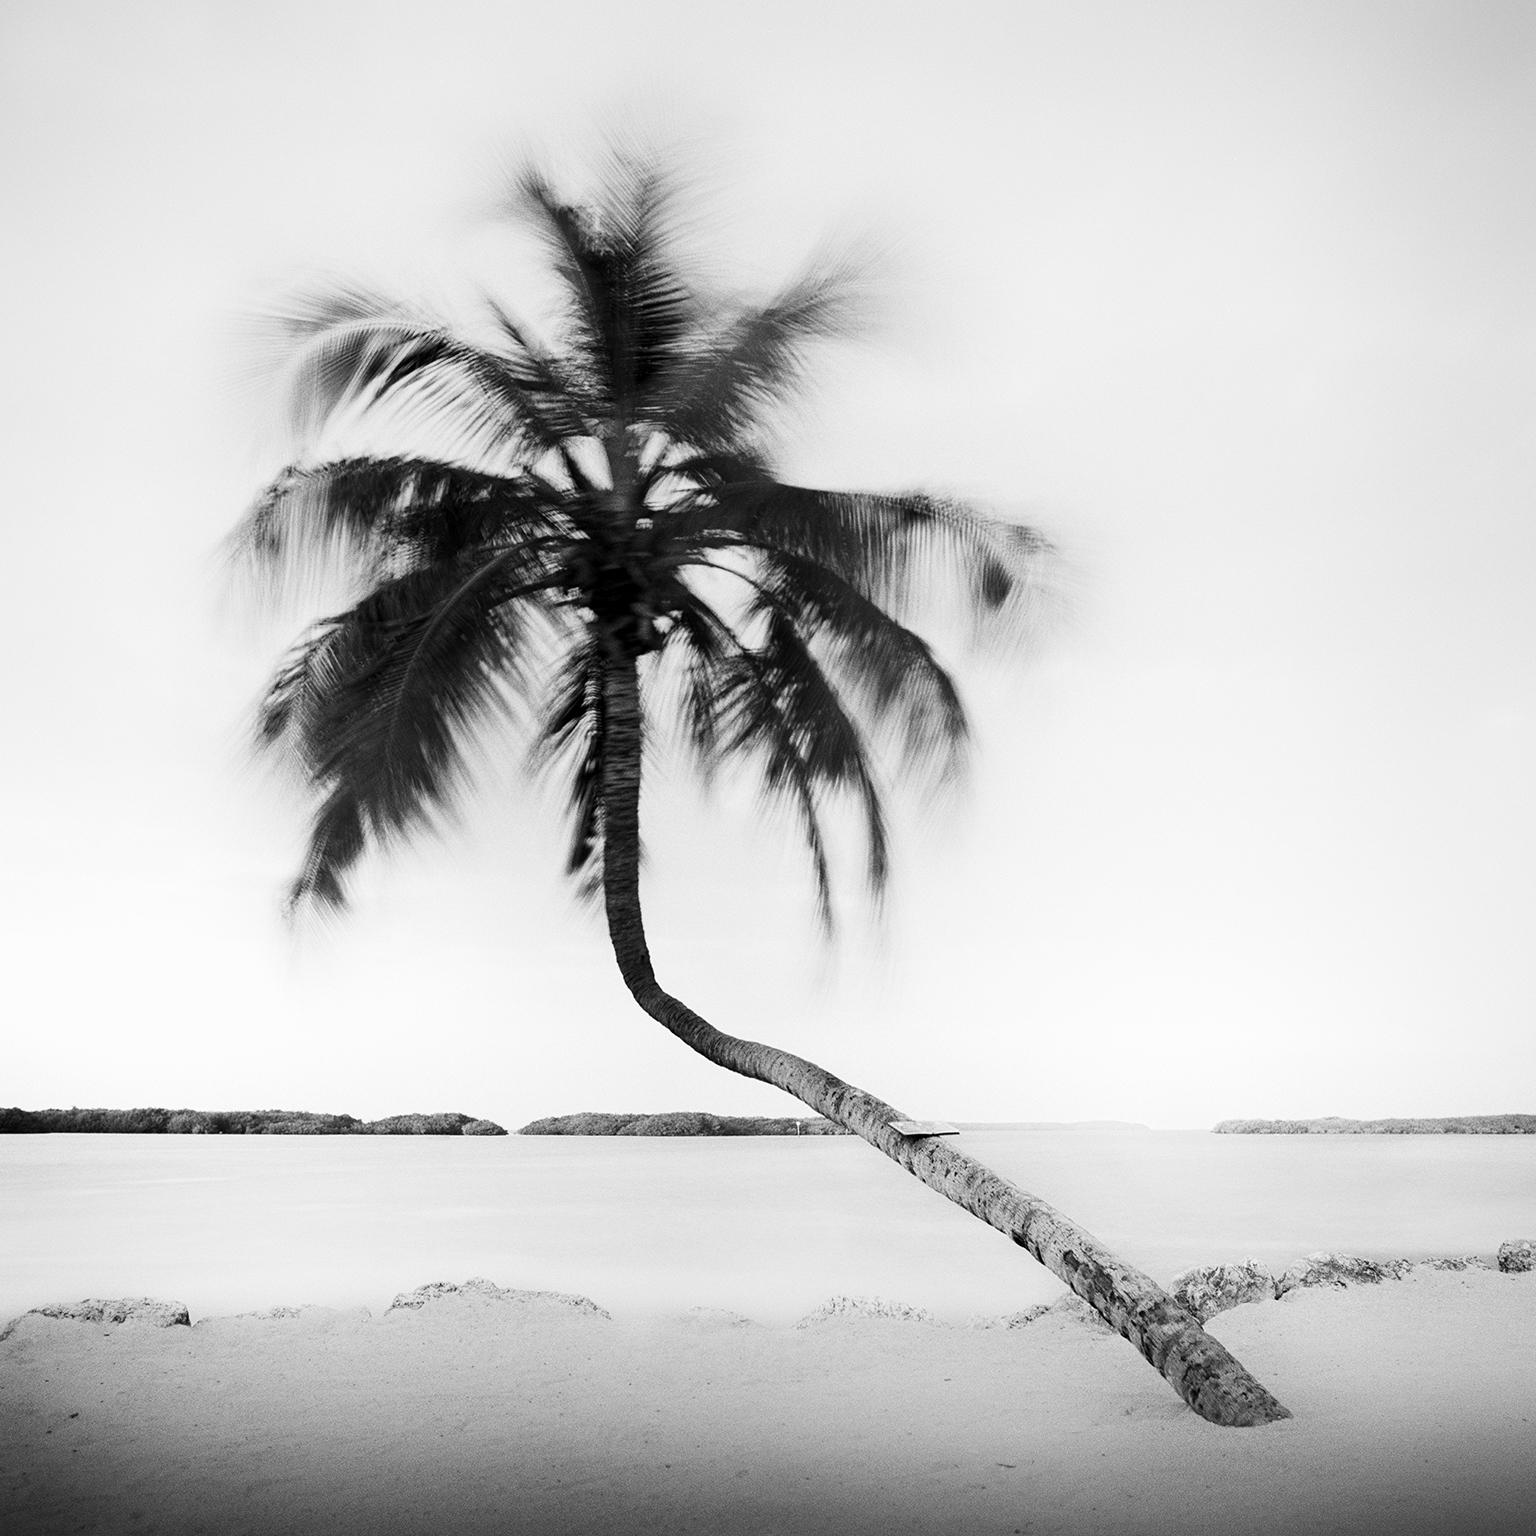 Gerald Berghammer, Ina Forstinger Black and White Photograph - Bent Palm, Beach, Florida, USA, black and white fine art photography landscape